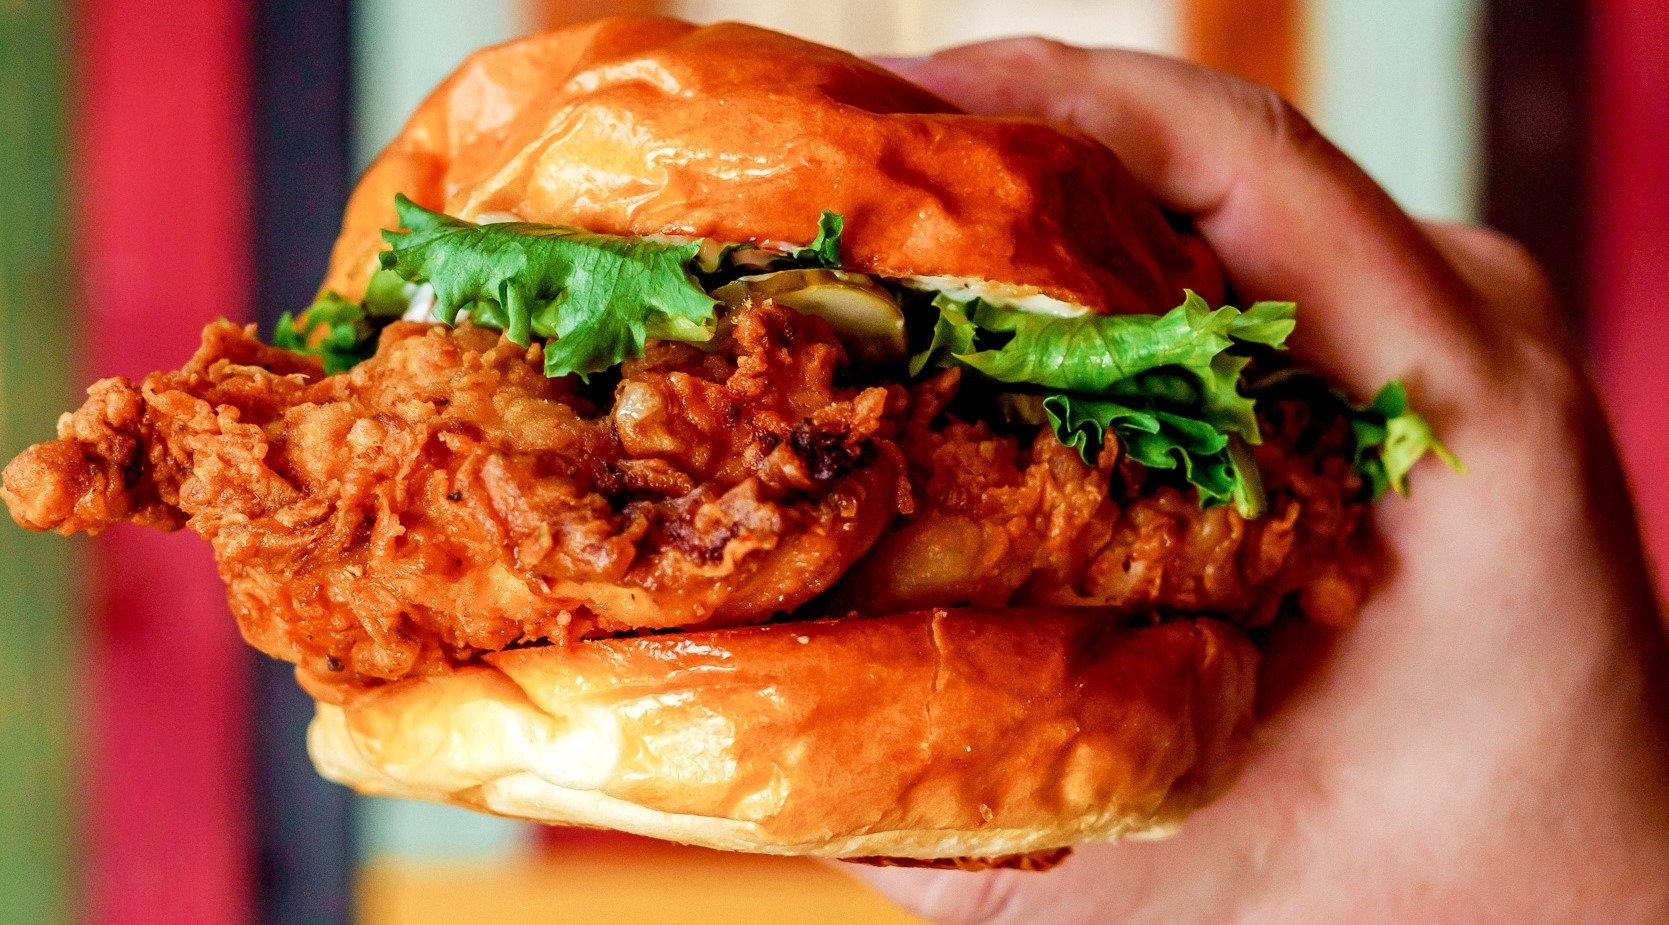 A hand holding a large breaded chicken sandwich with lettuce.